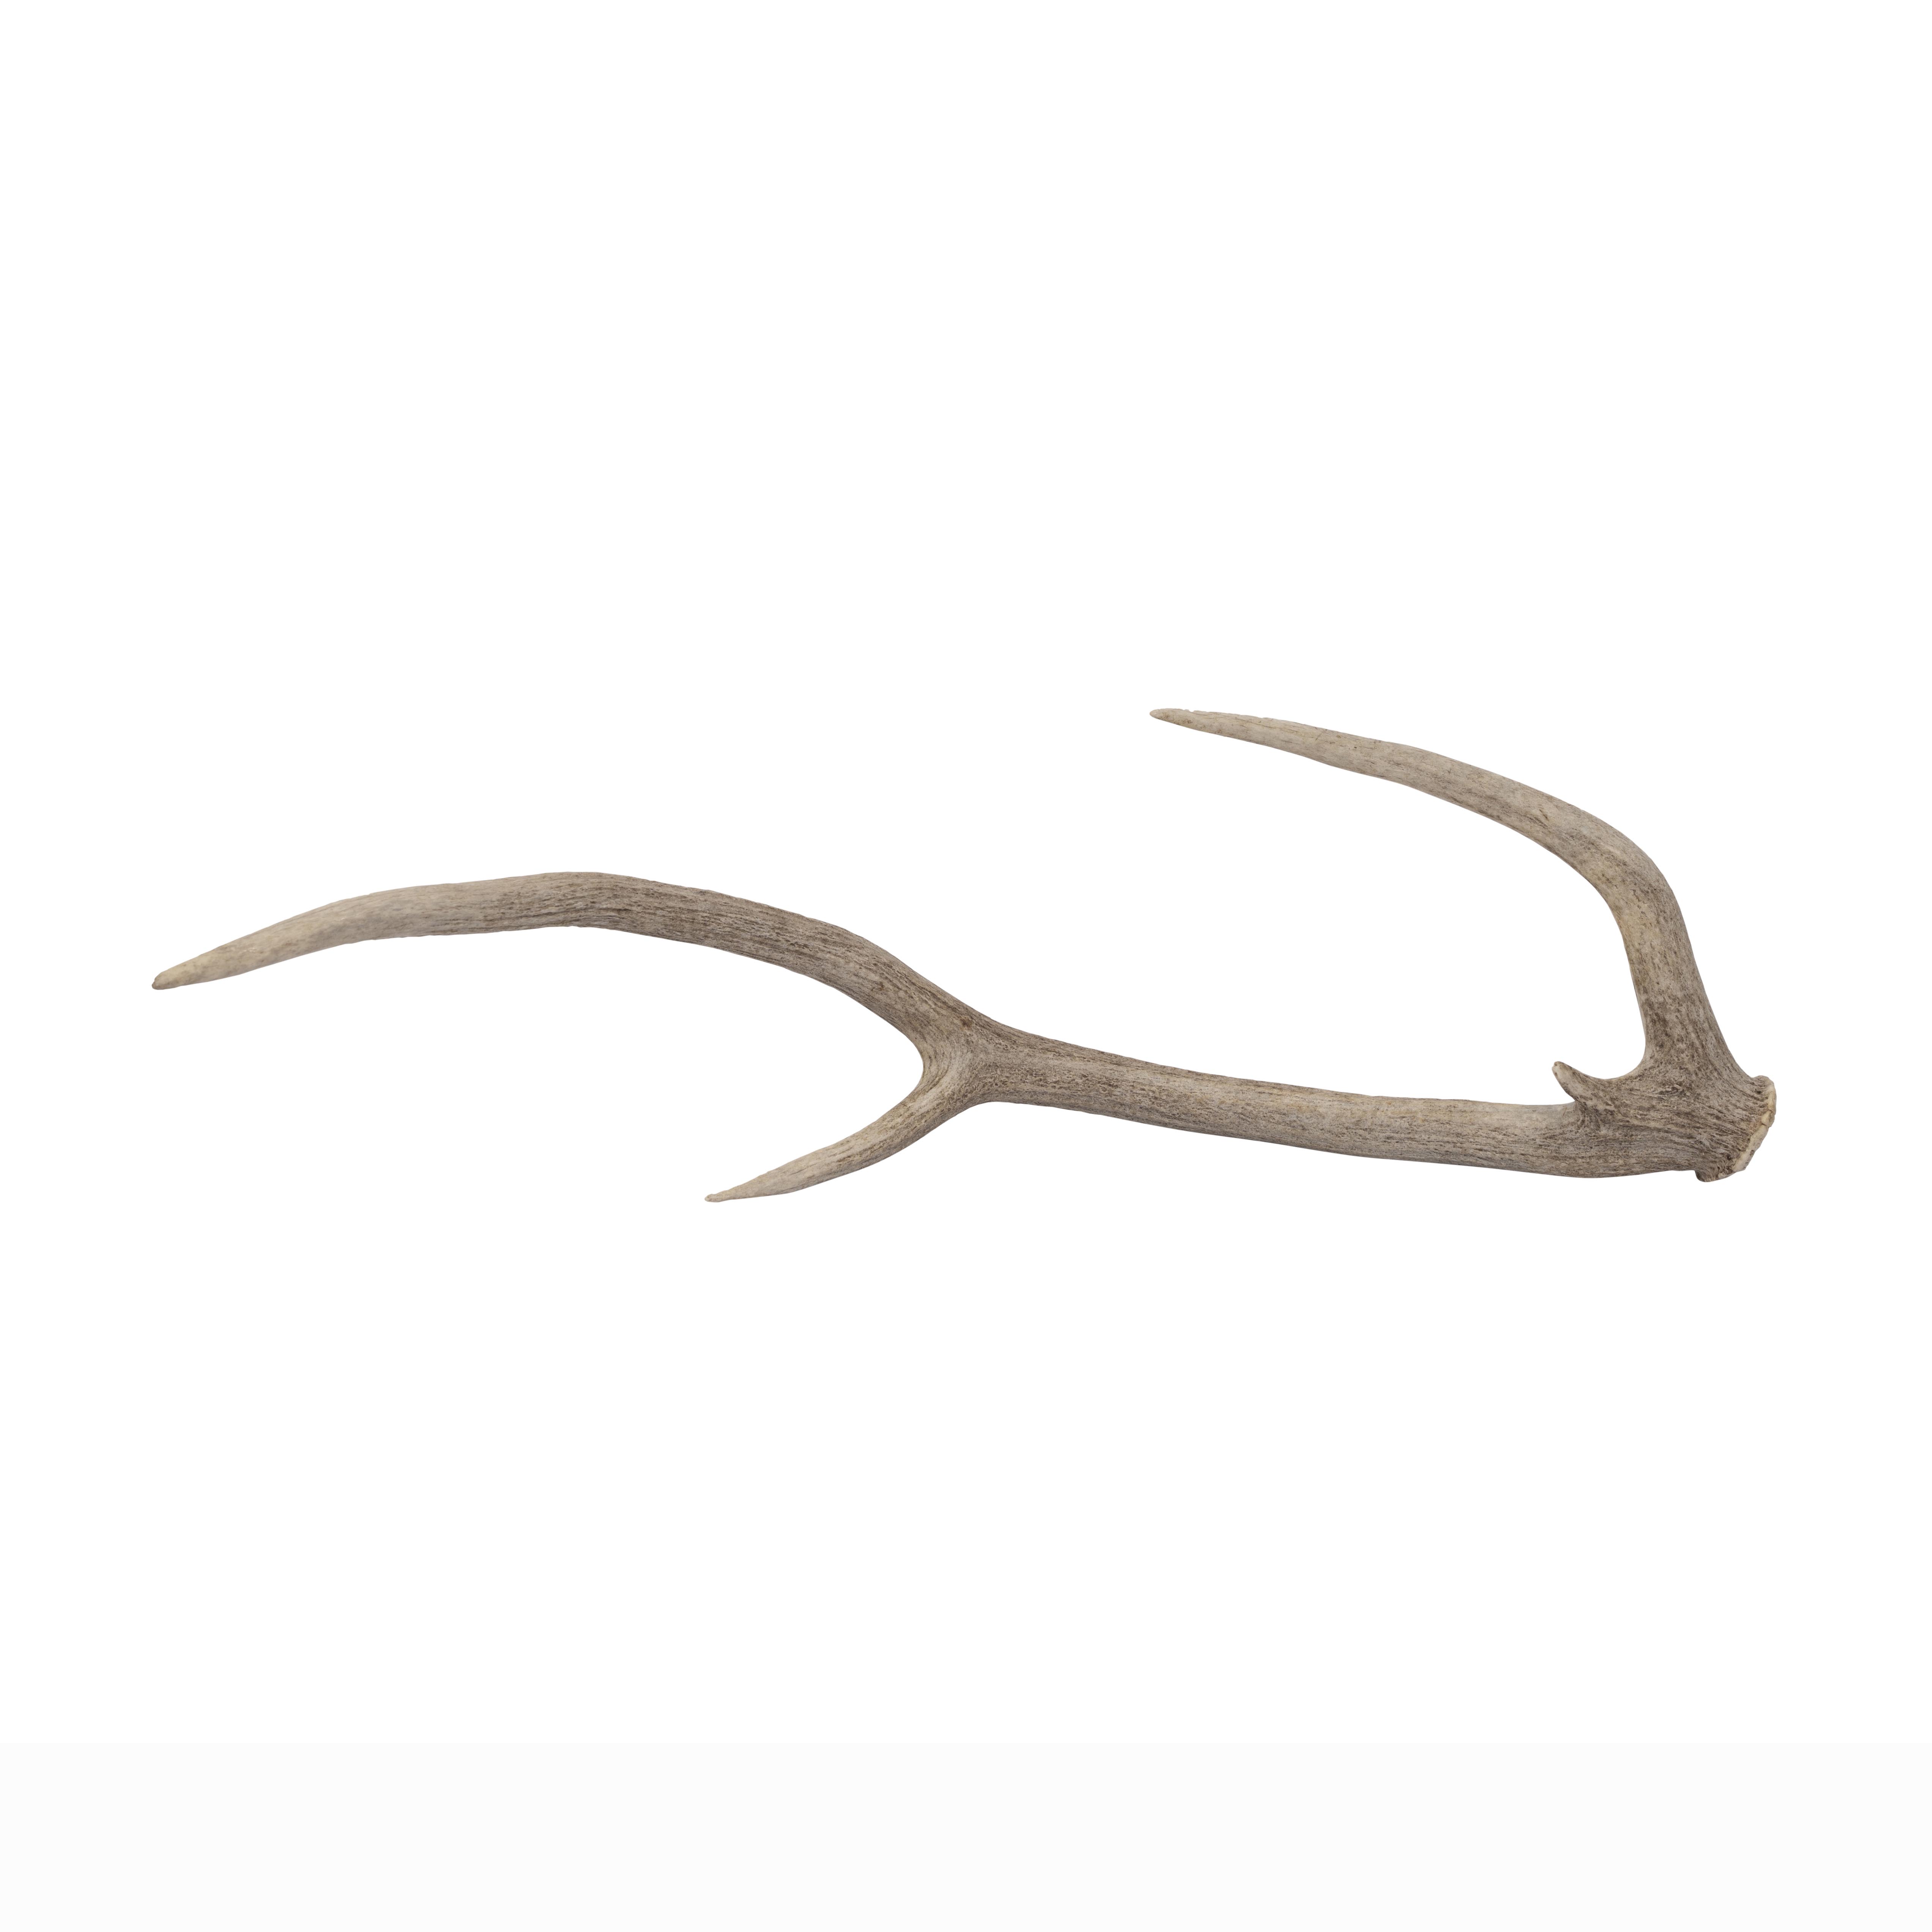 Axis Antler